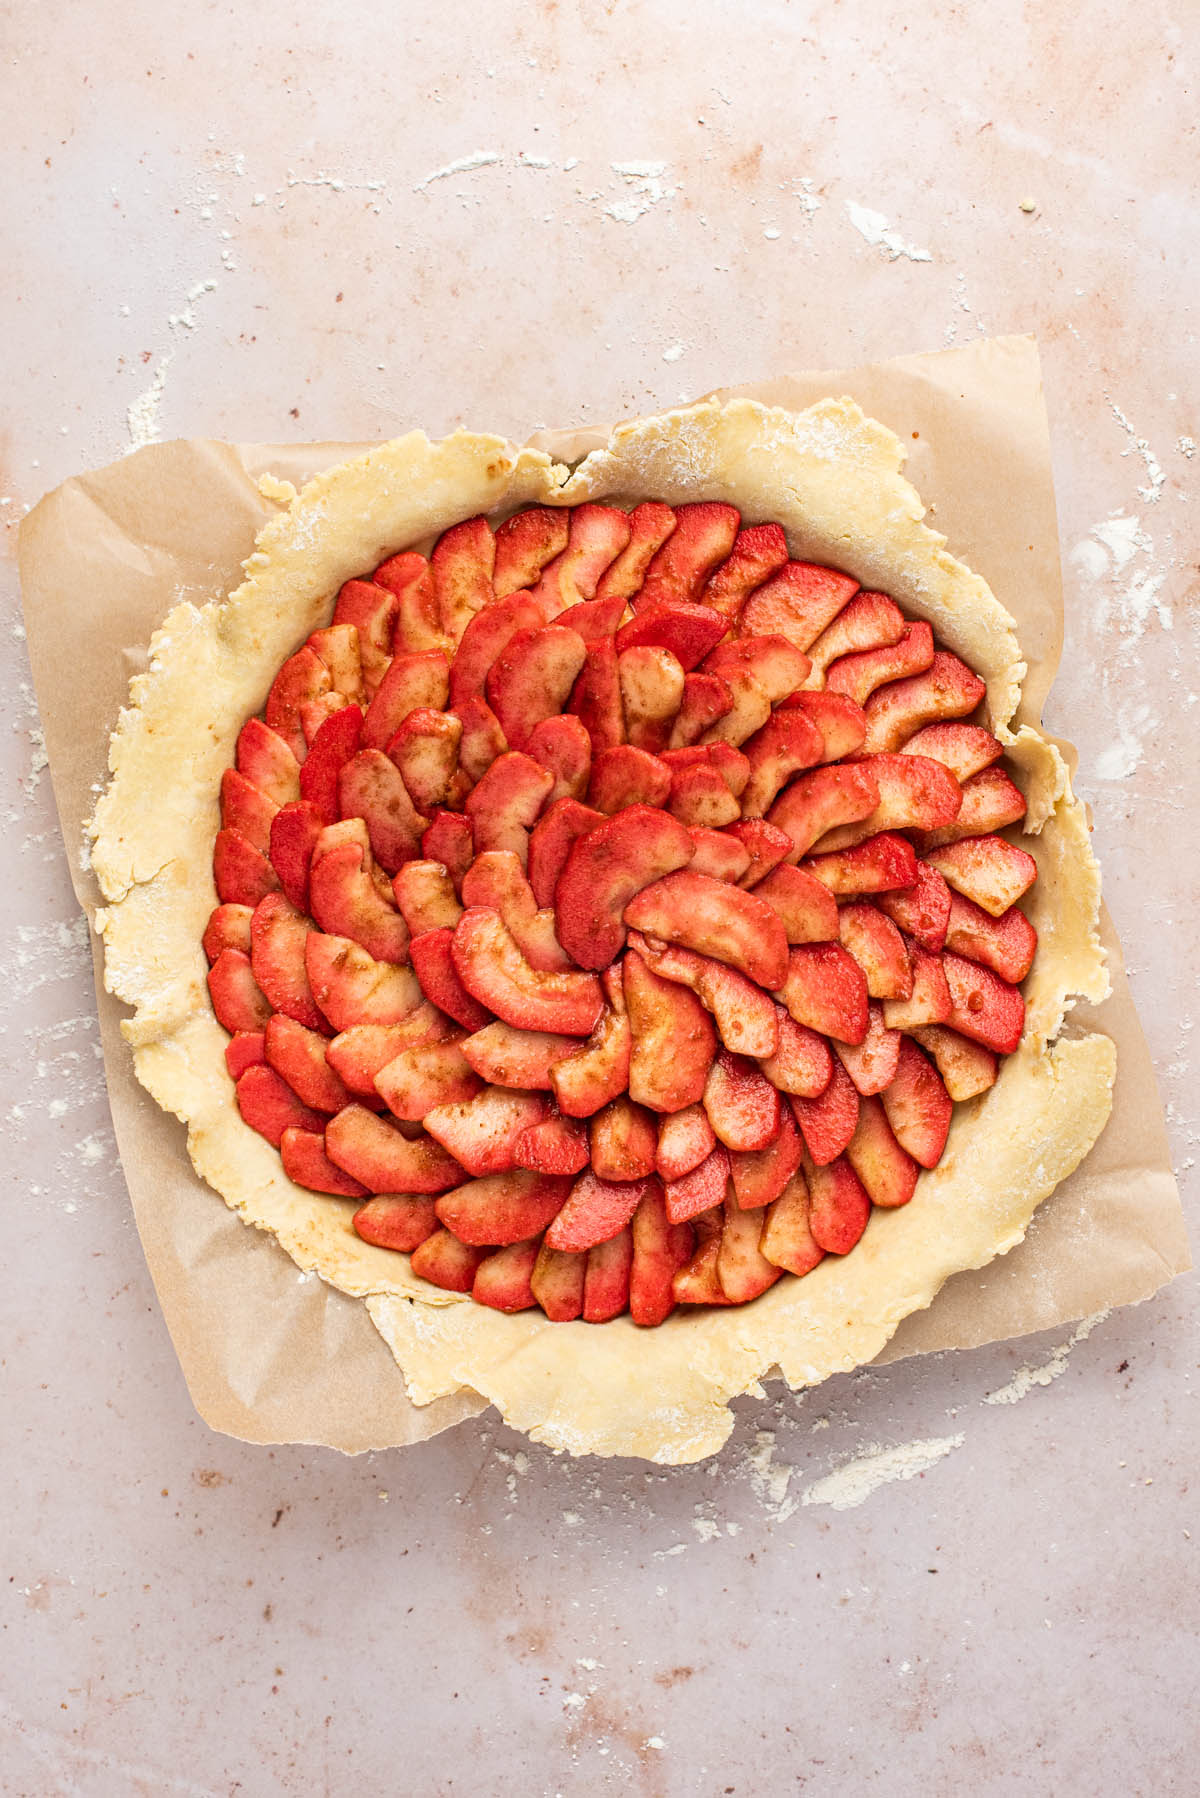 Sliced apples arranged in a spiral in the pastry.